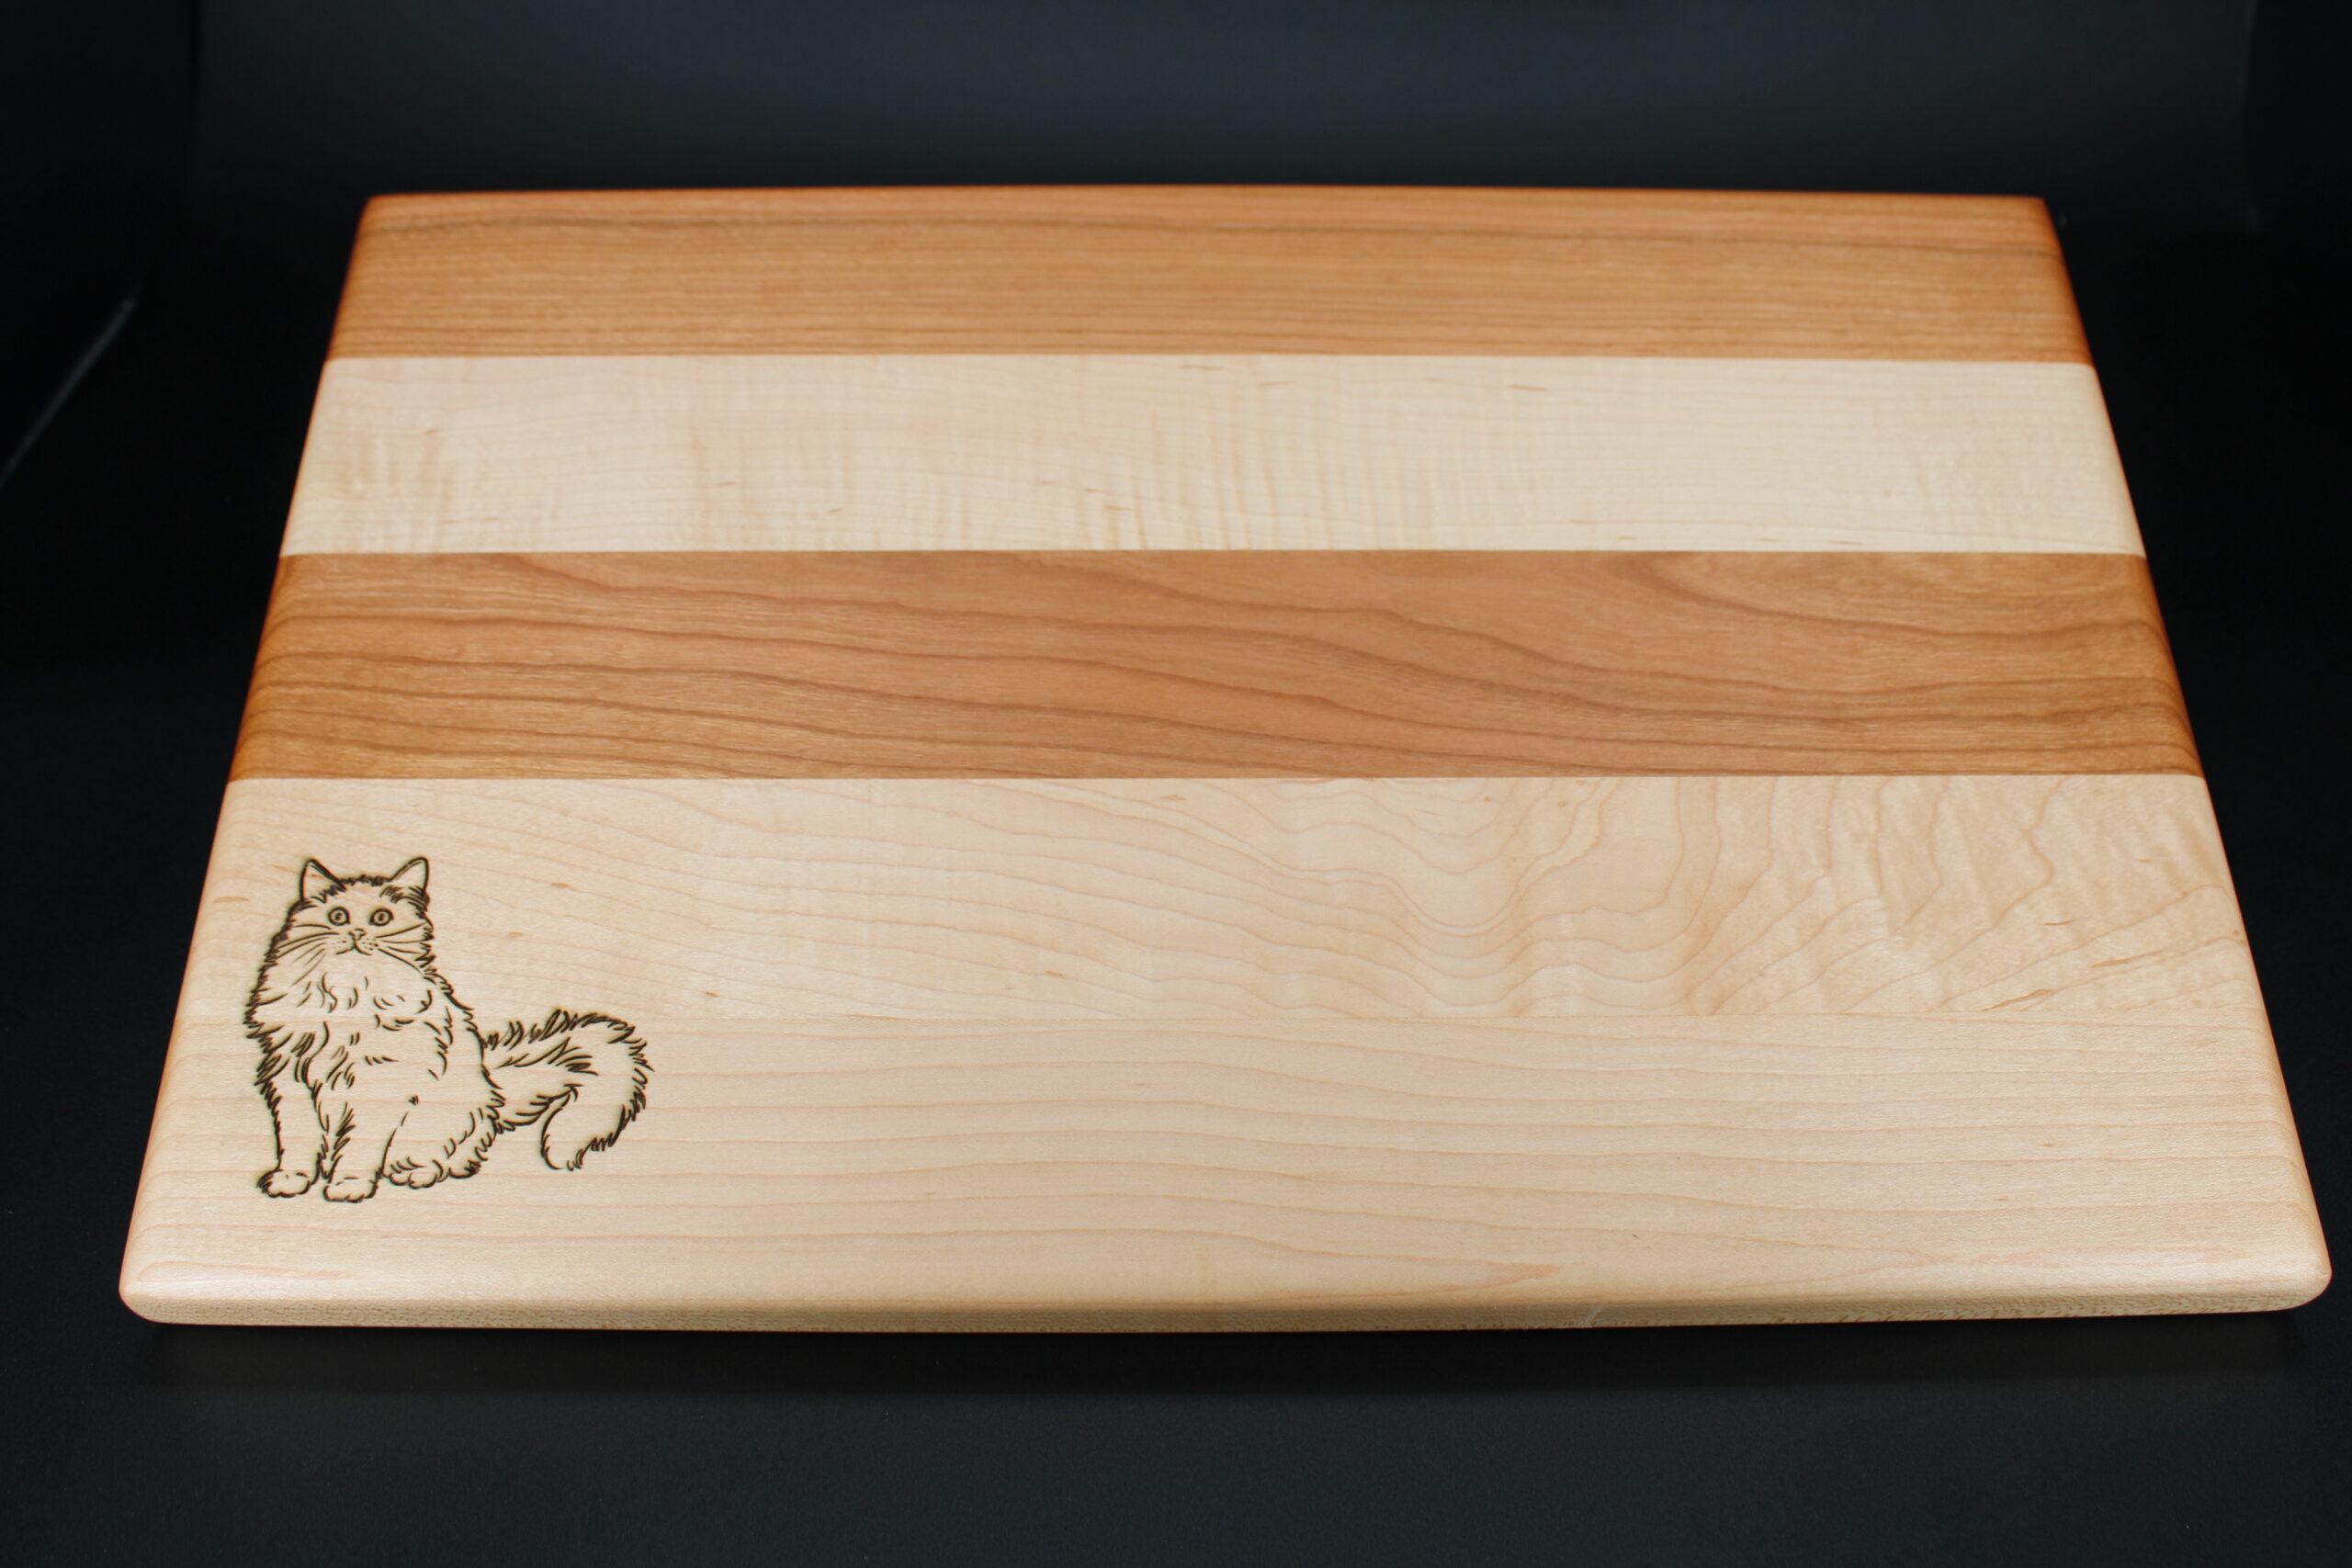 Maple and Cherry charcuterie board/ cutting board with a cat as a birthday gift.